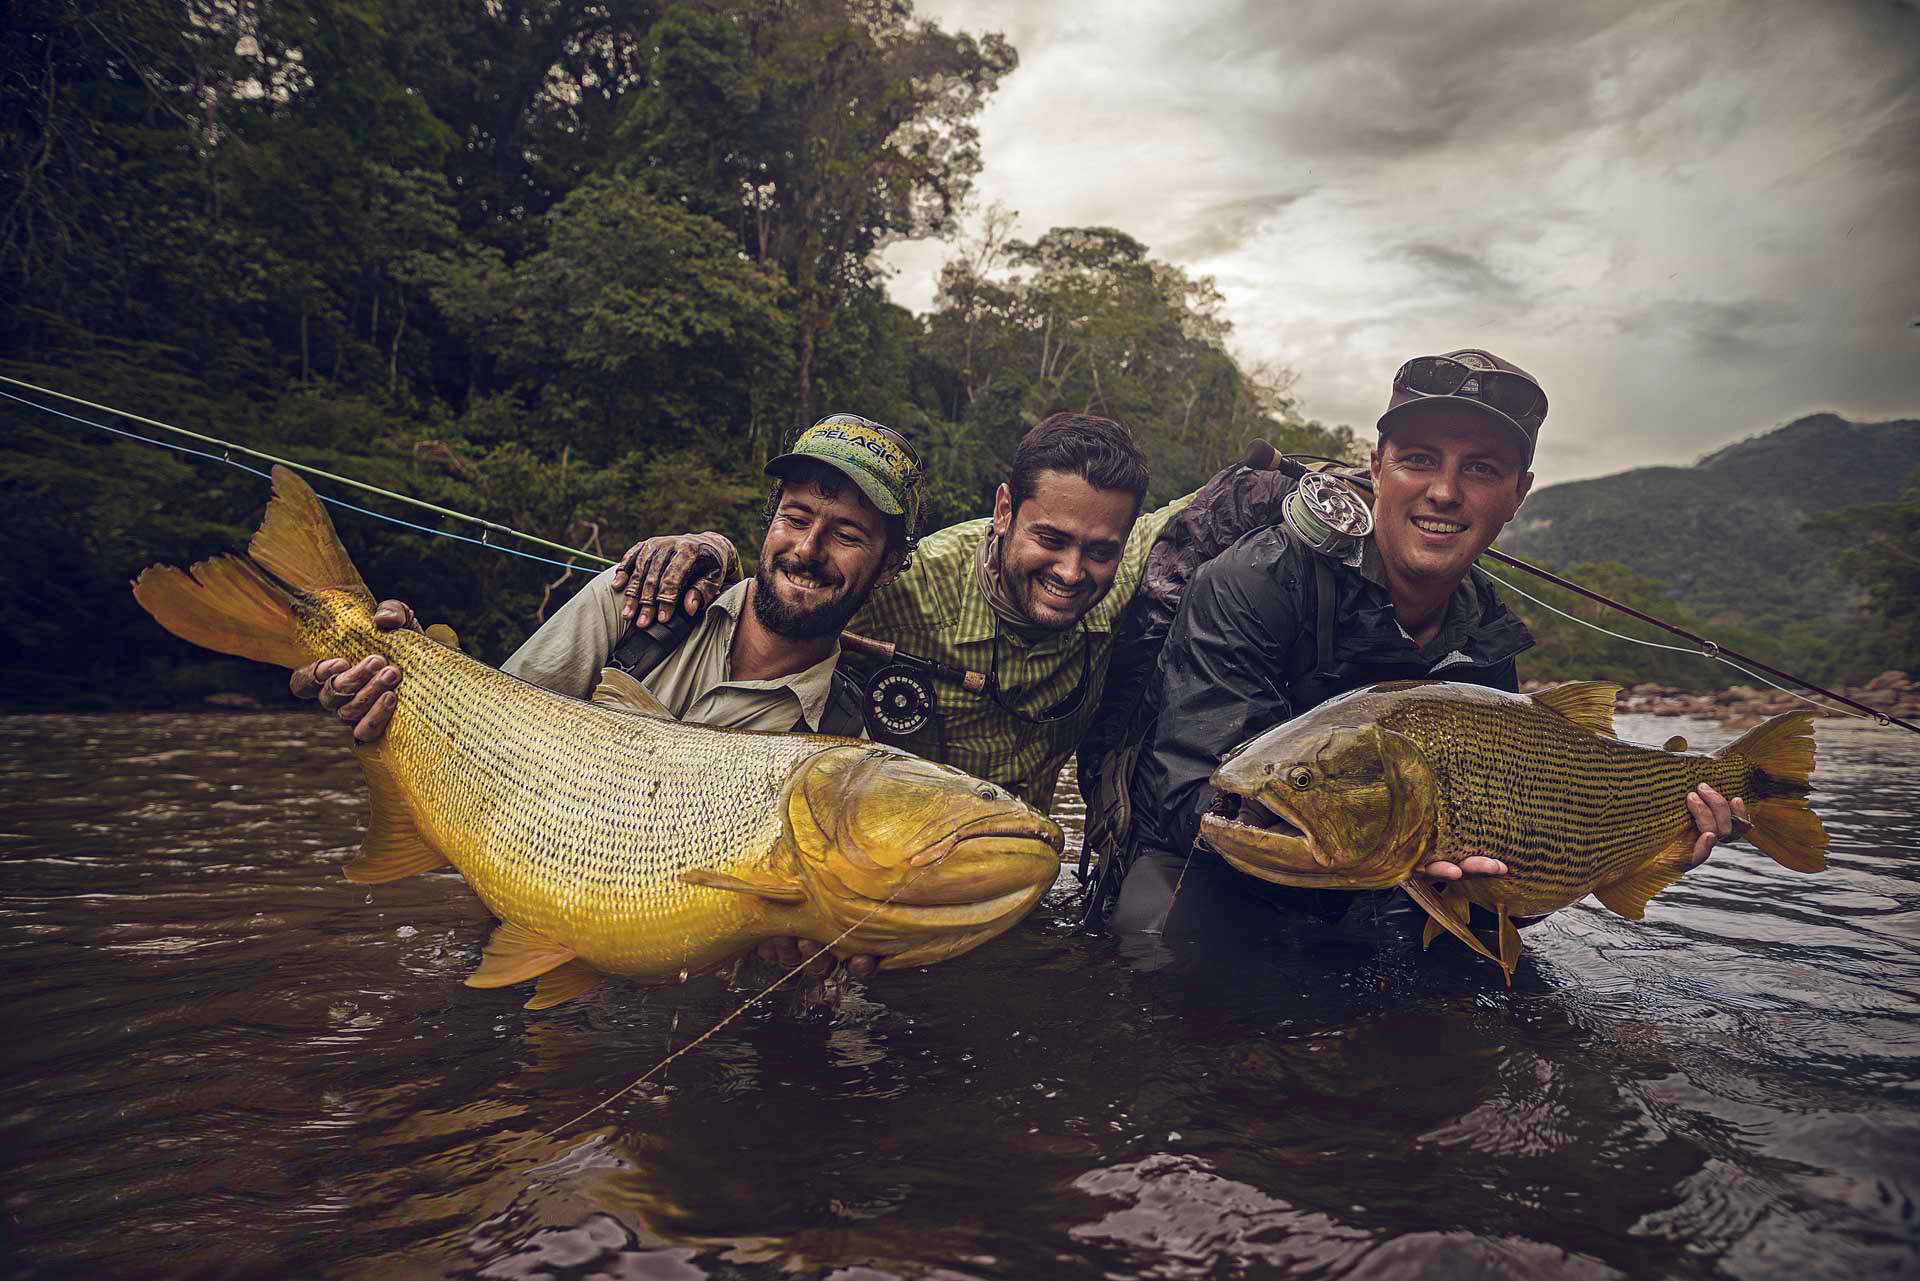 Golden Dorado are the primary target species you will be going after but you will also encounter these species as well on your trip into the Jungle. Muturo (a.k.a. Jau)), Pacu or Pirapitinga, Sabalo Surubi or Striped Catfish, Tabarana- The Silver Dorado, Yatorana